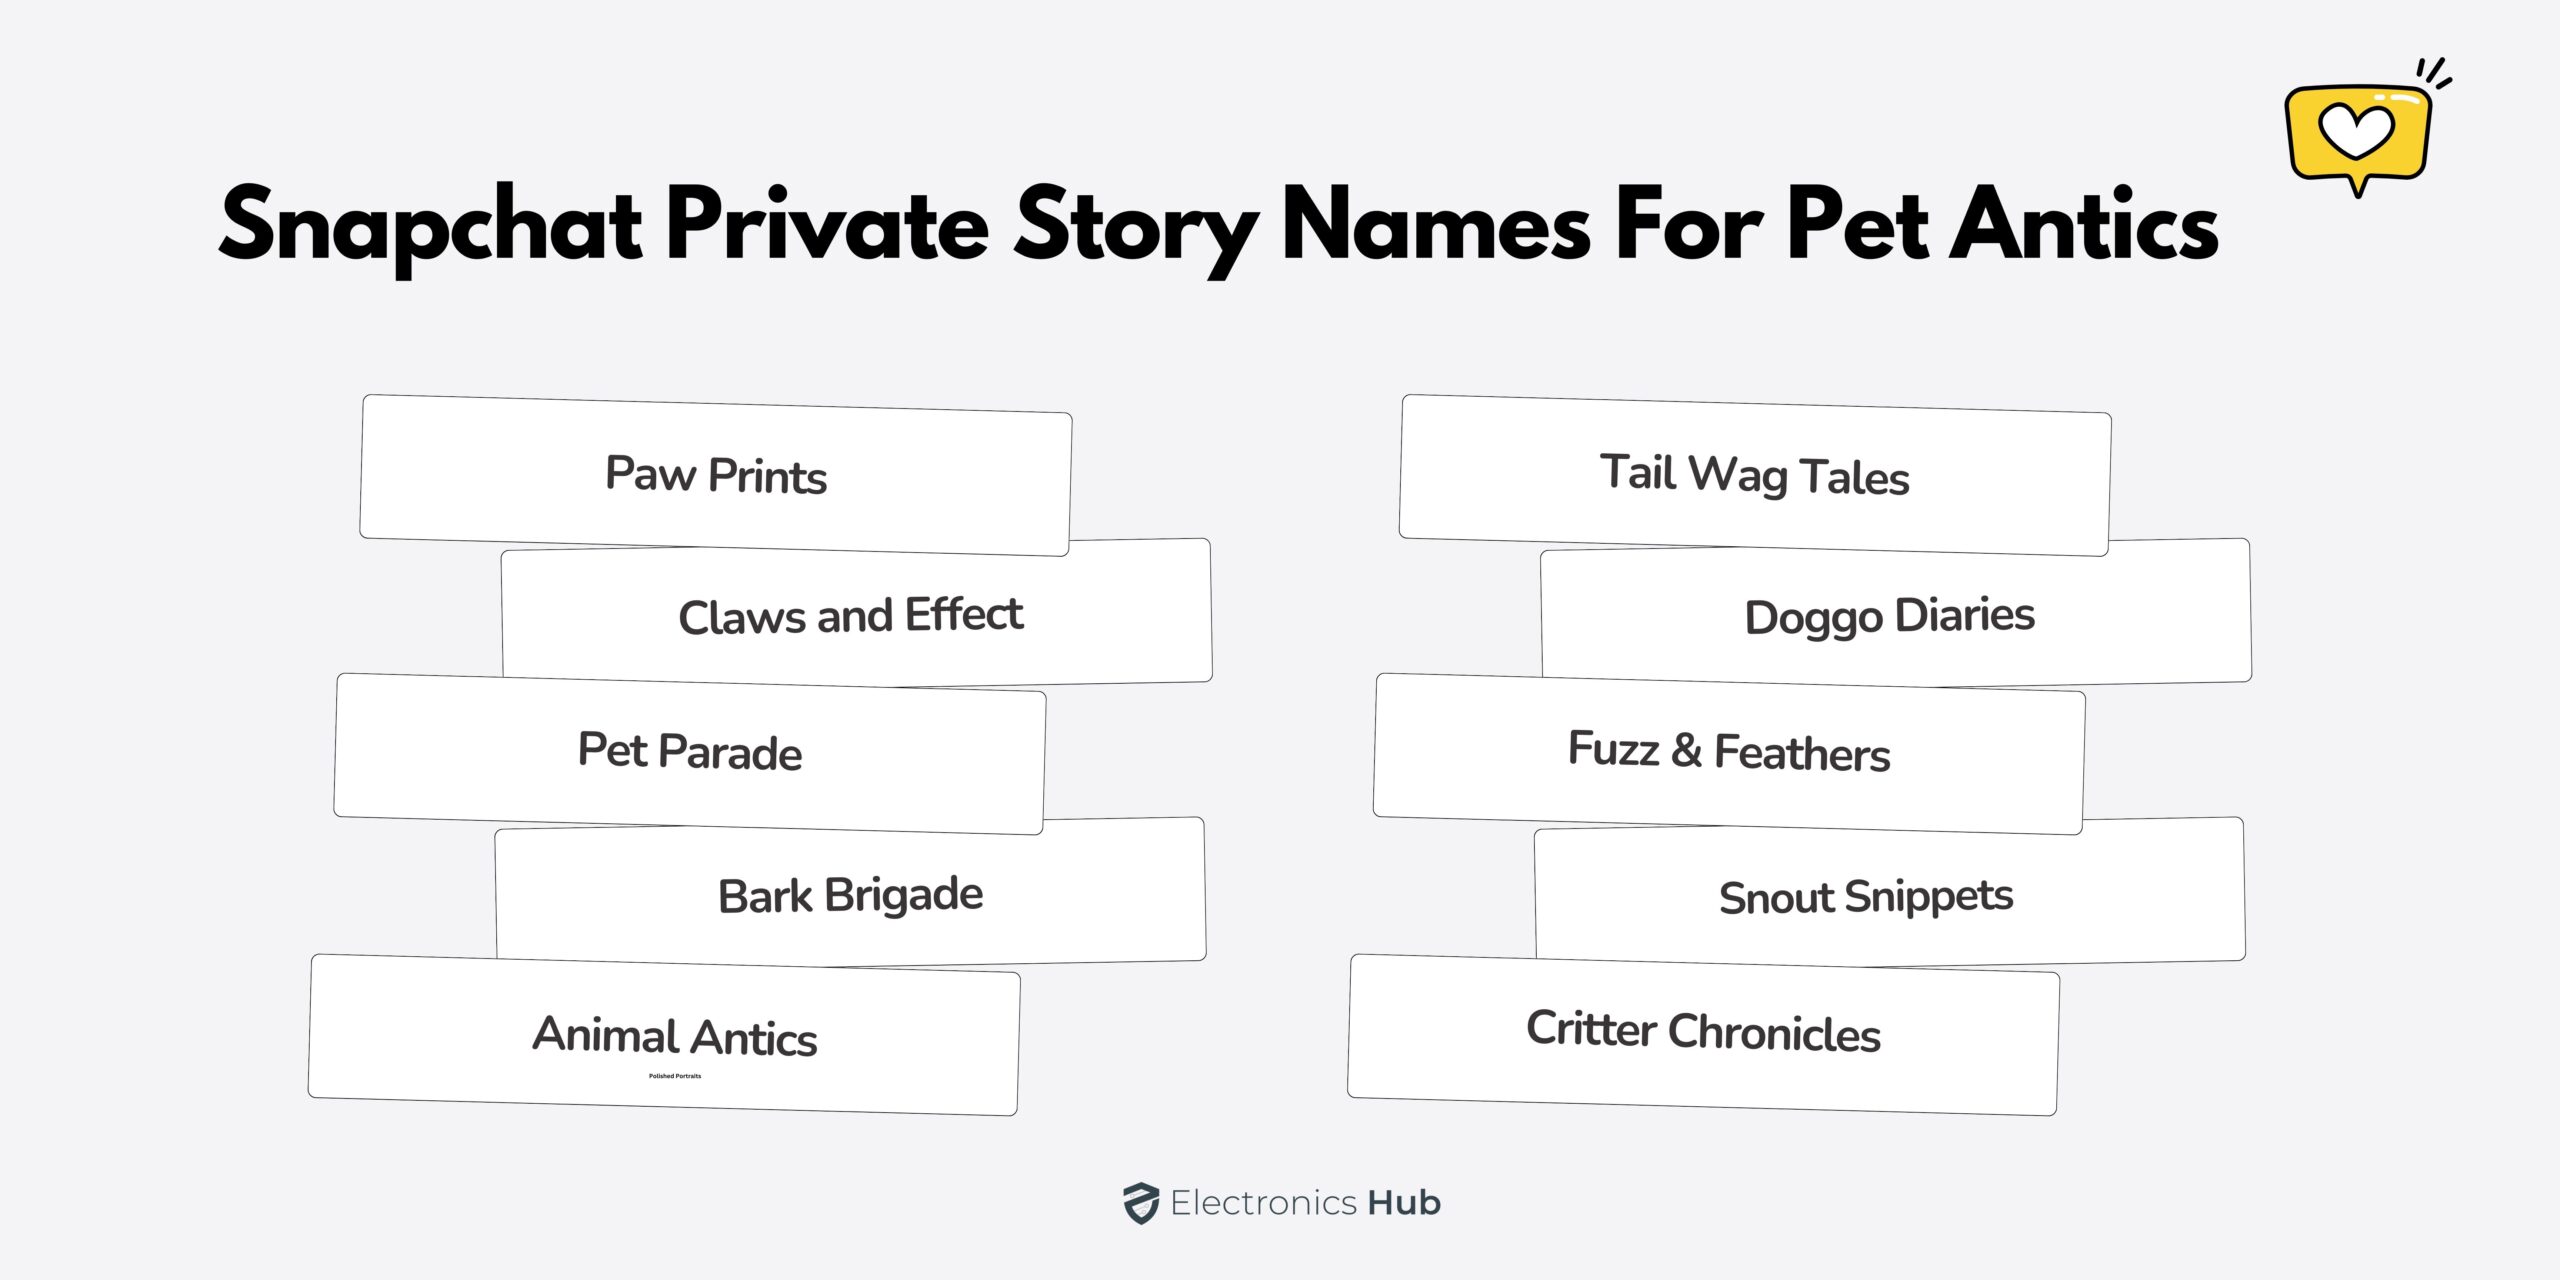 Snapchat Private Story Names for Pet Antics